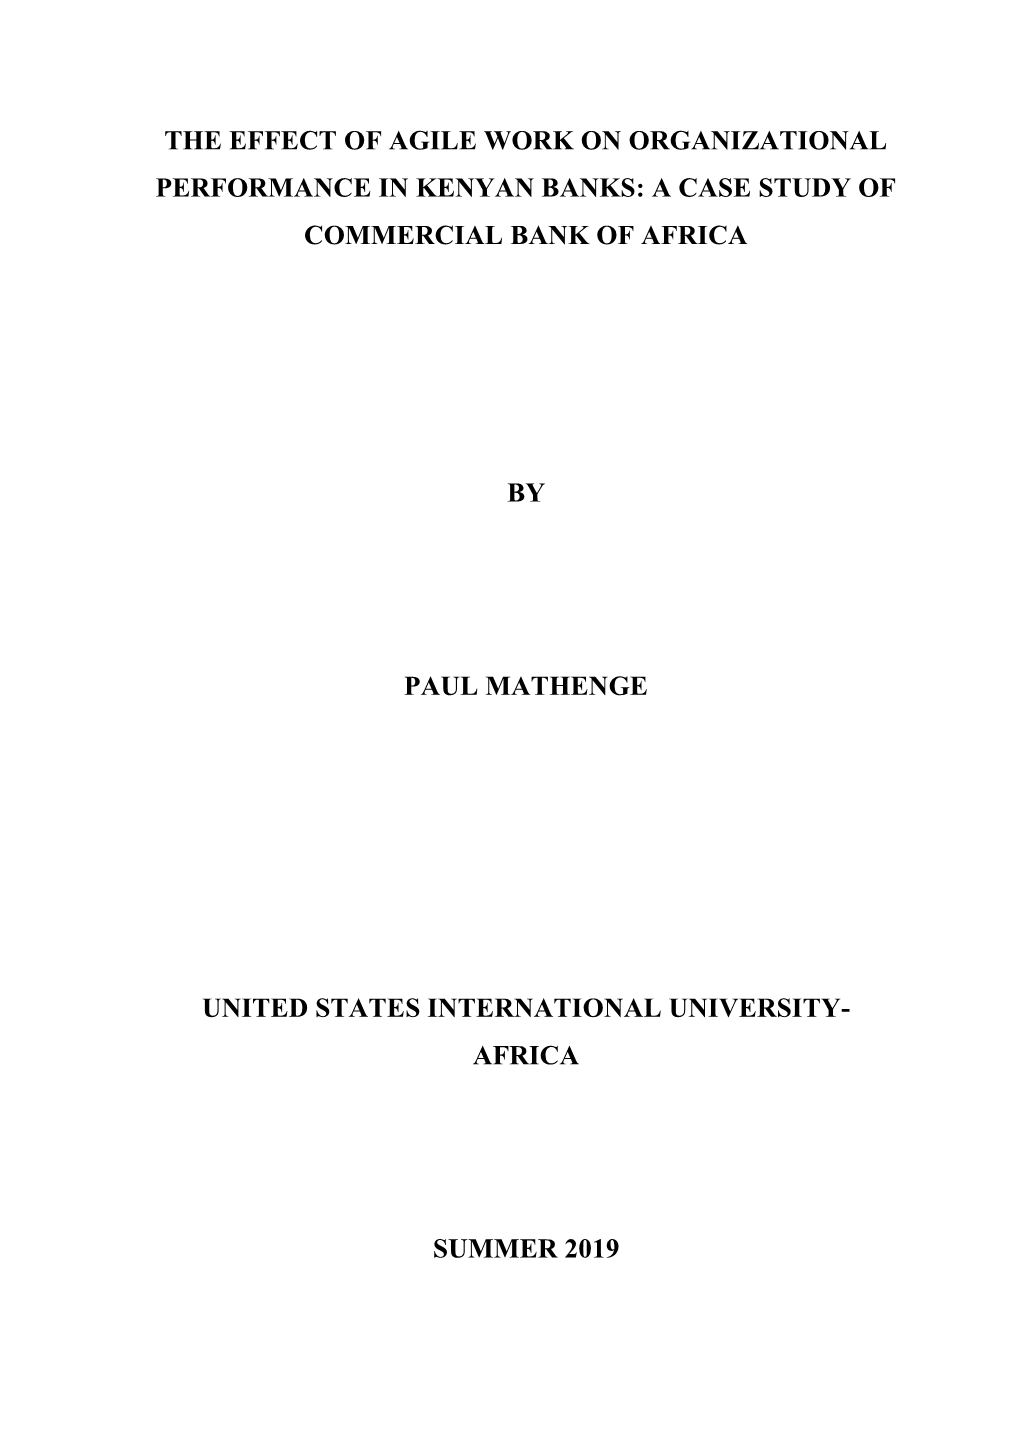 A Case Study of Commercial Bank of Africa by Paul Mathen